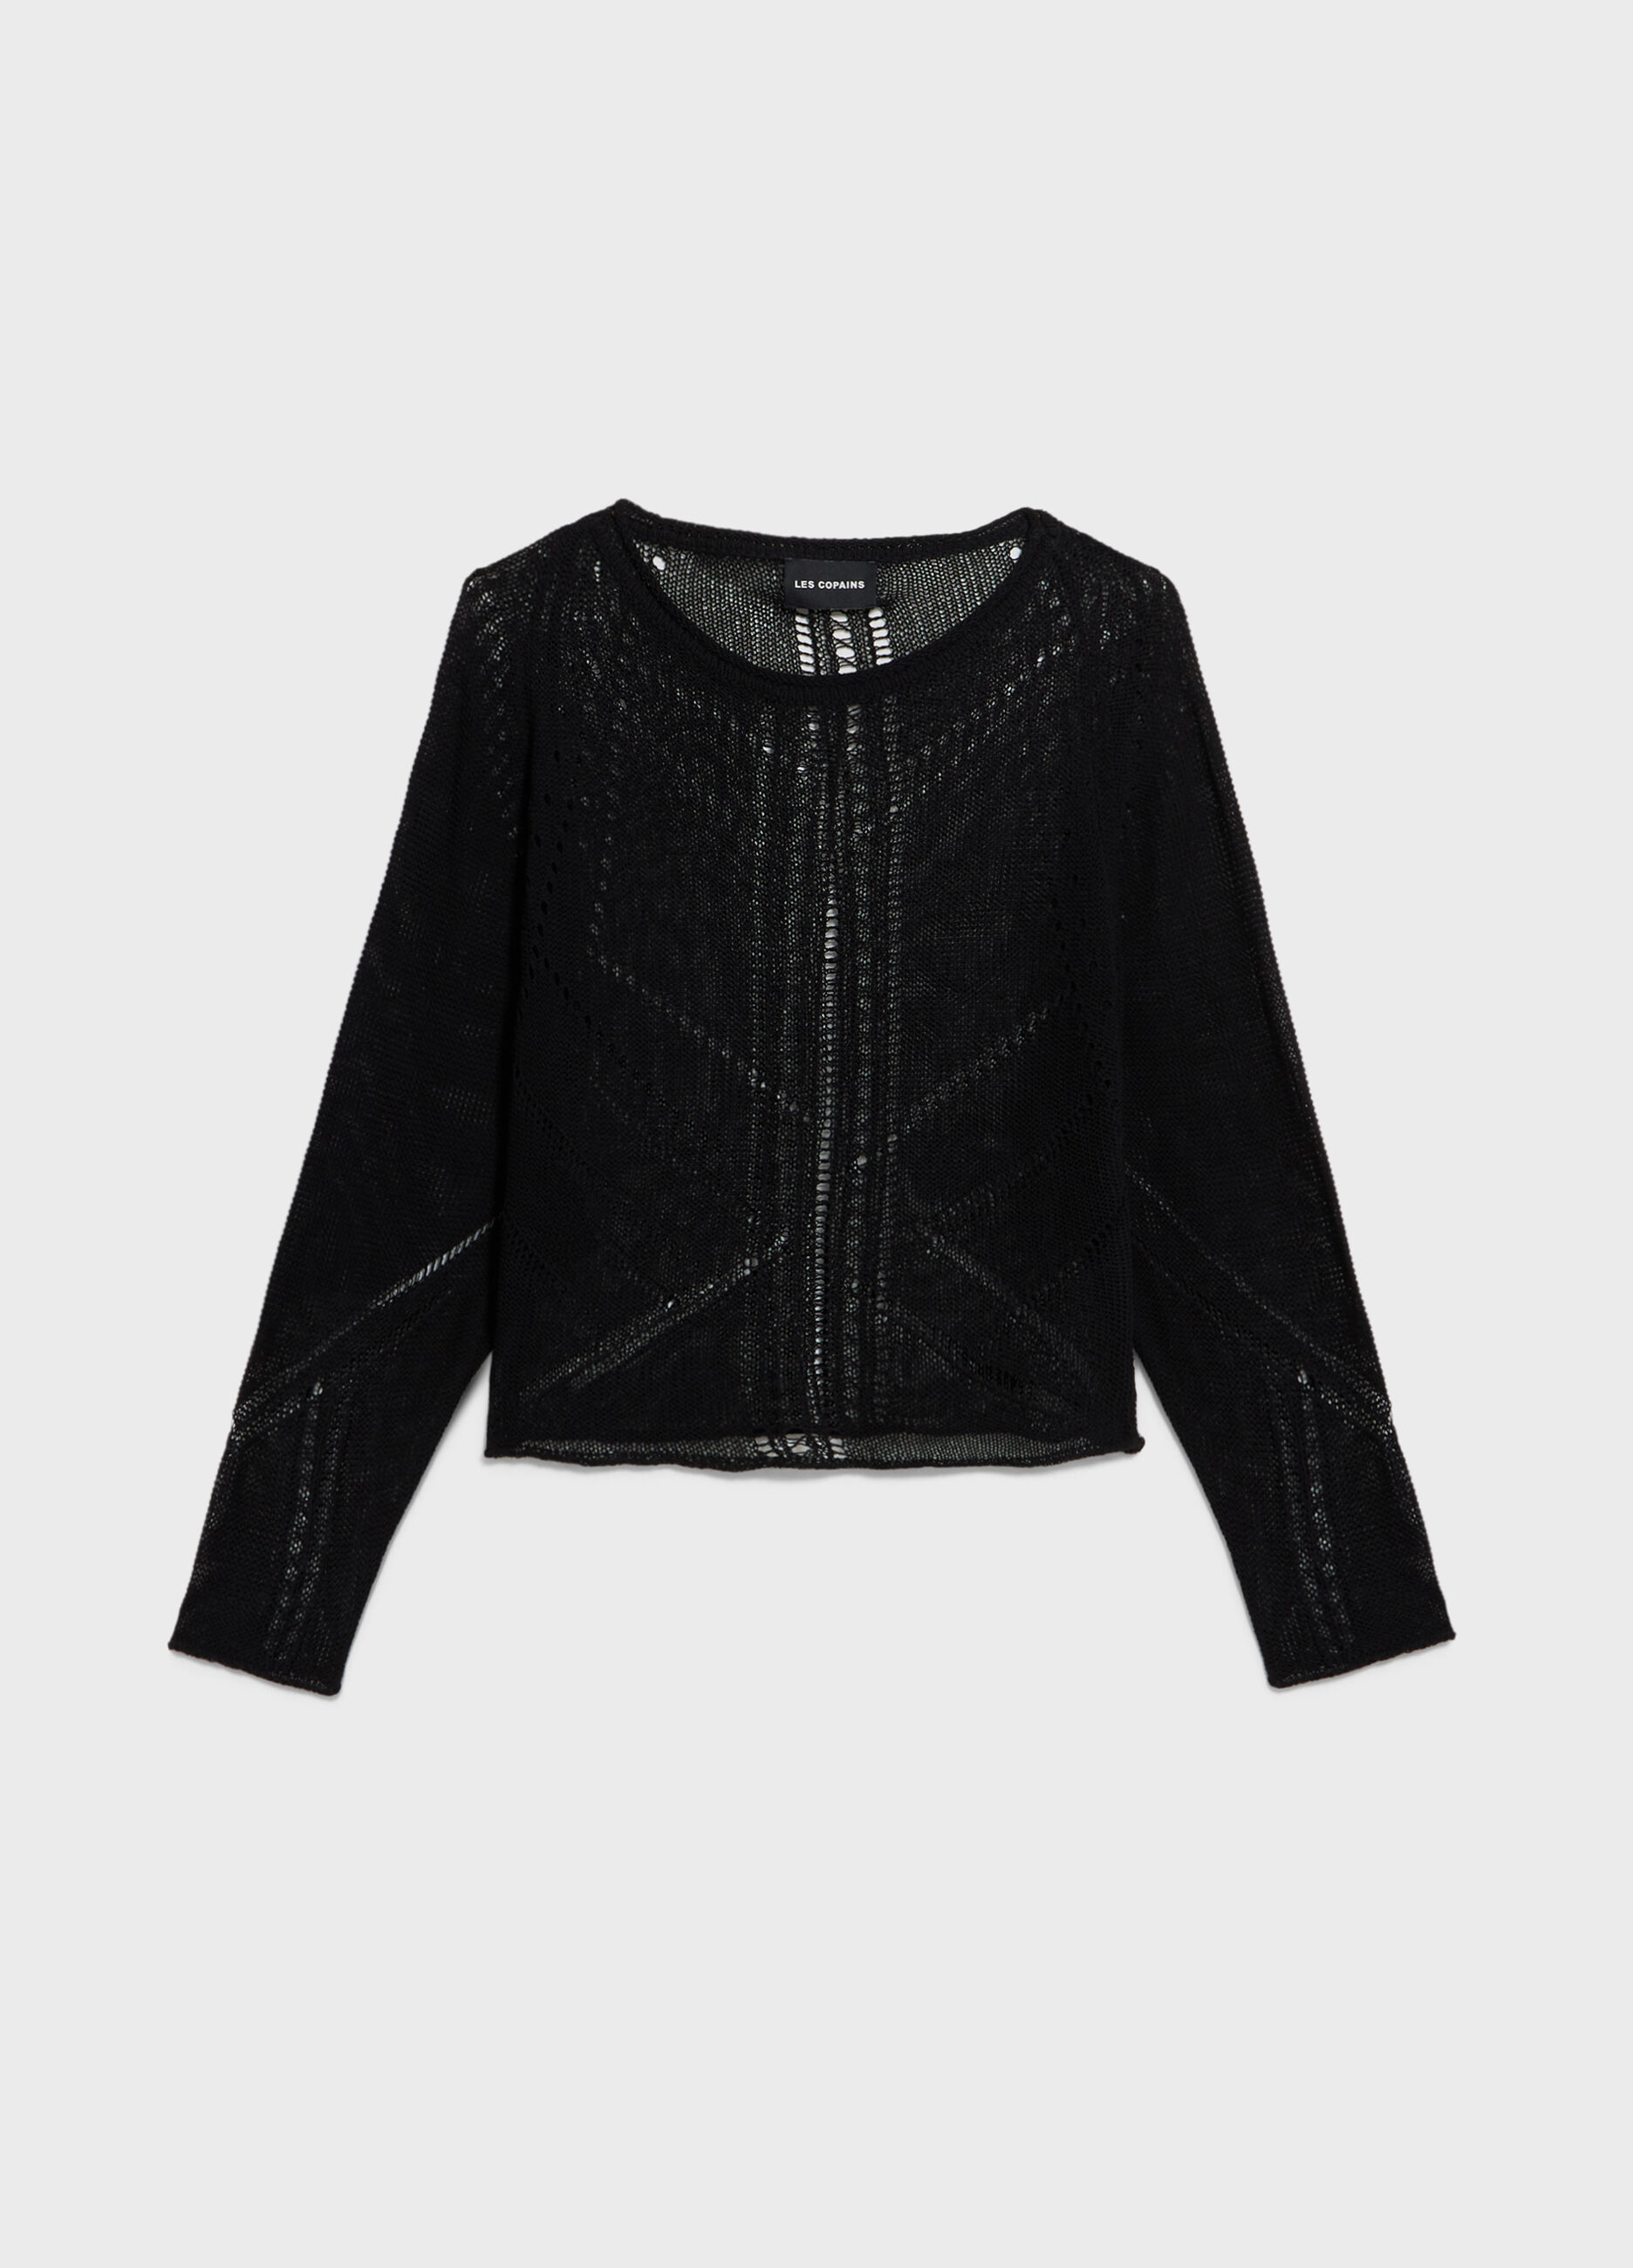 Openwork knitted top